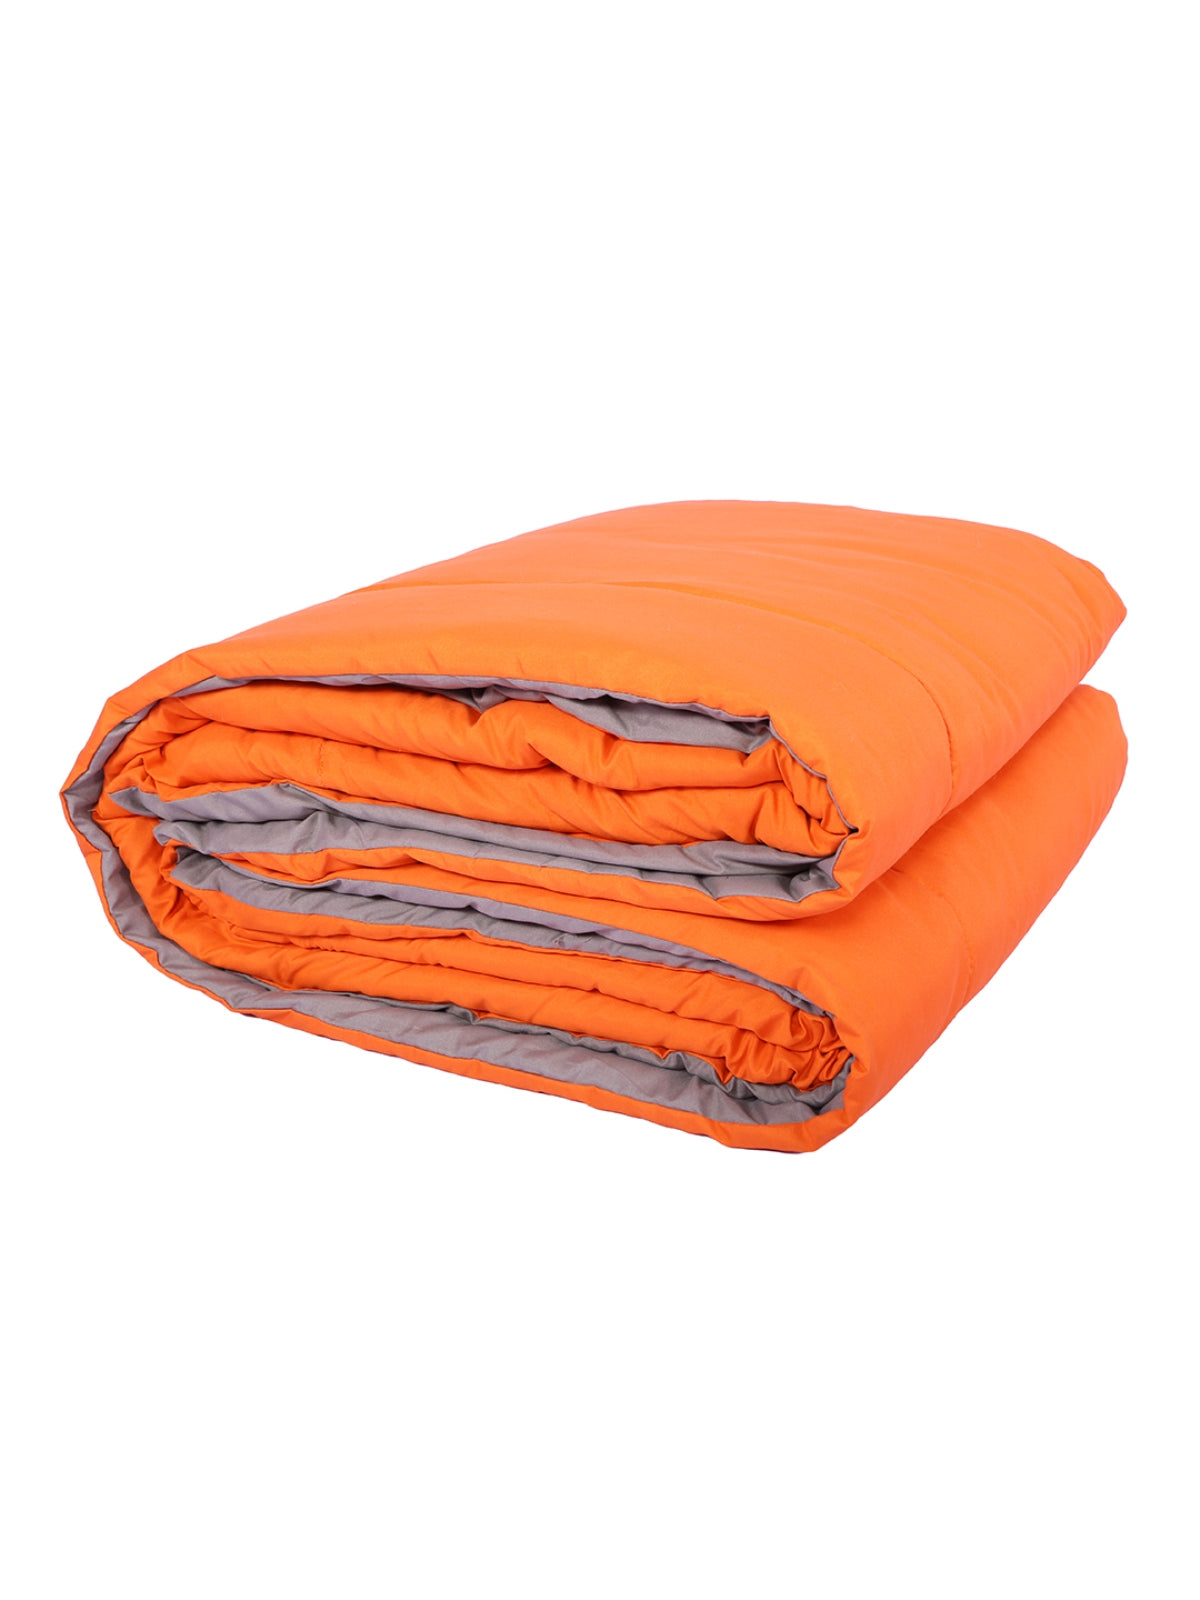 Solid 200 GSM Reversible AC Comforter for Double Bed - Orange & Pink